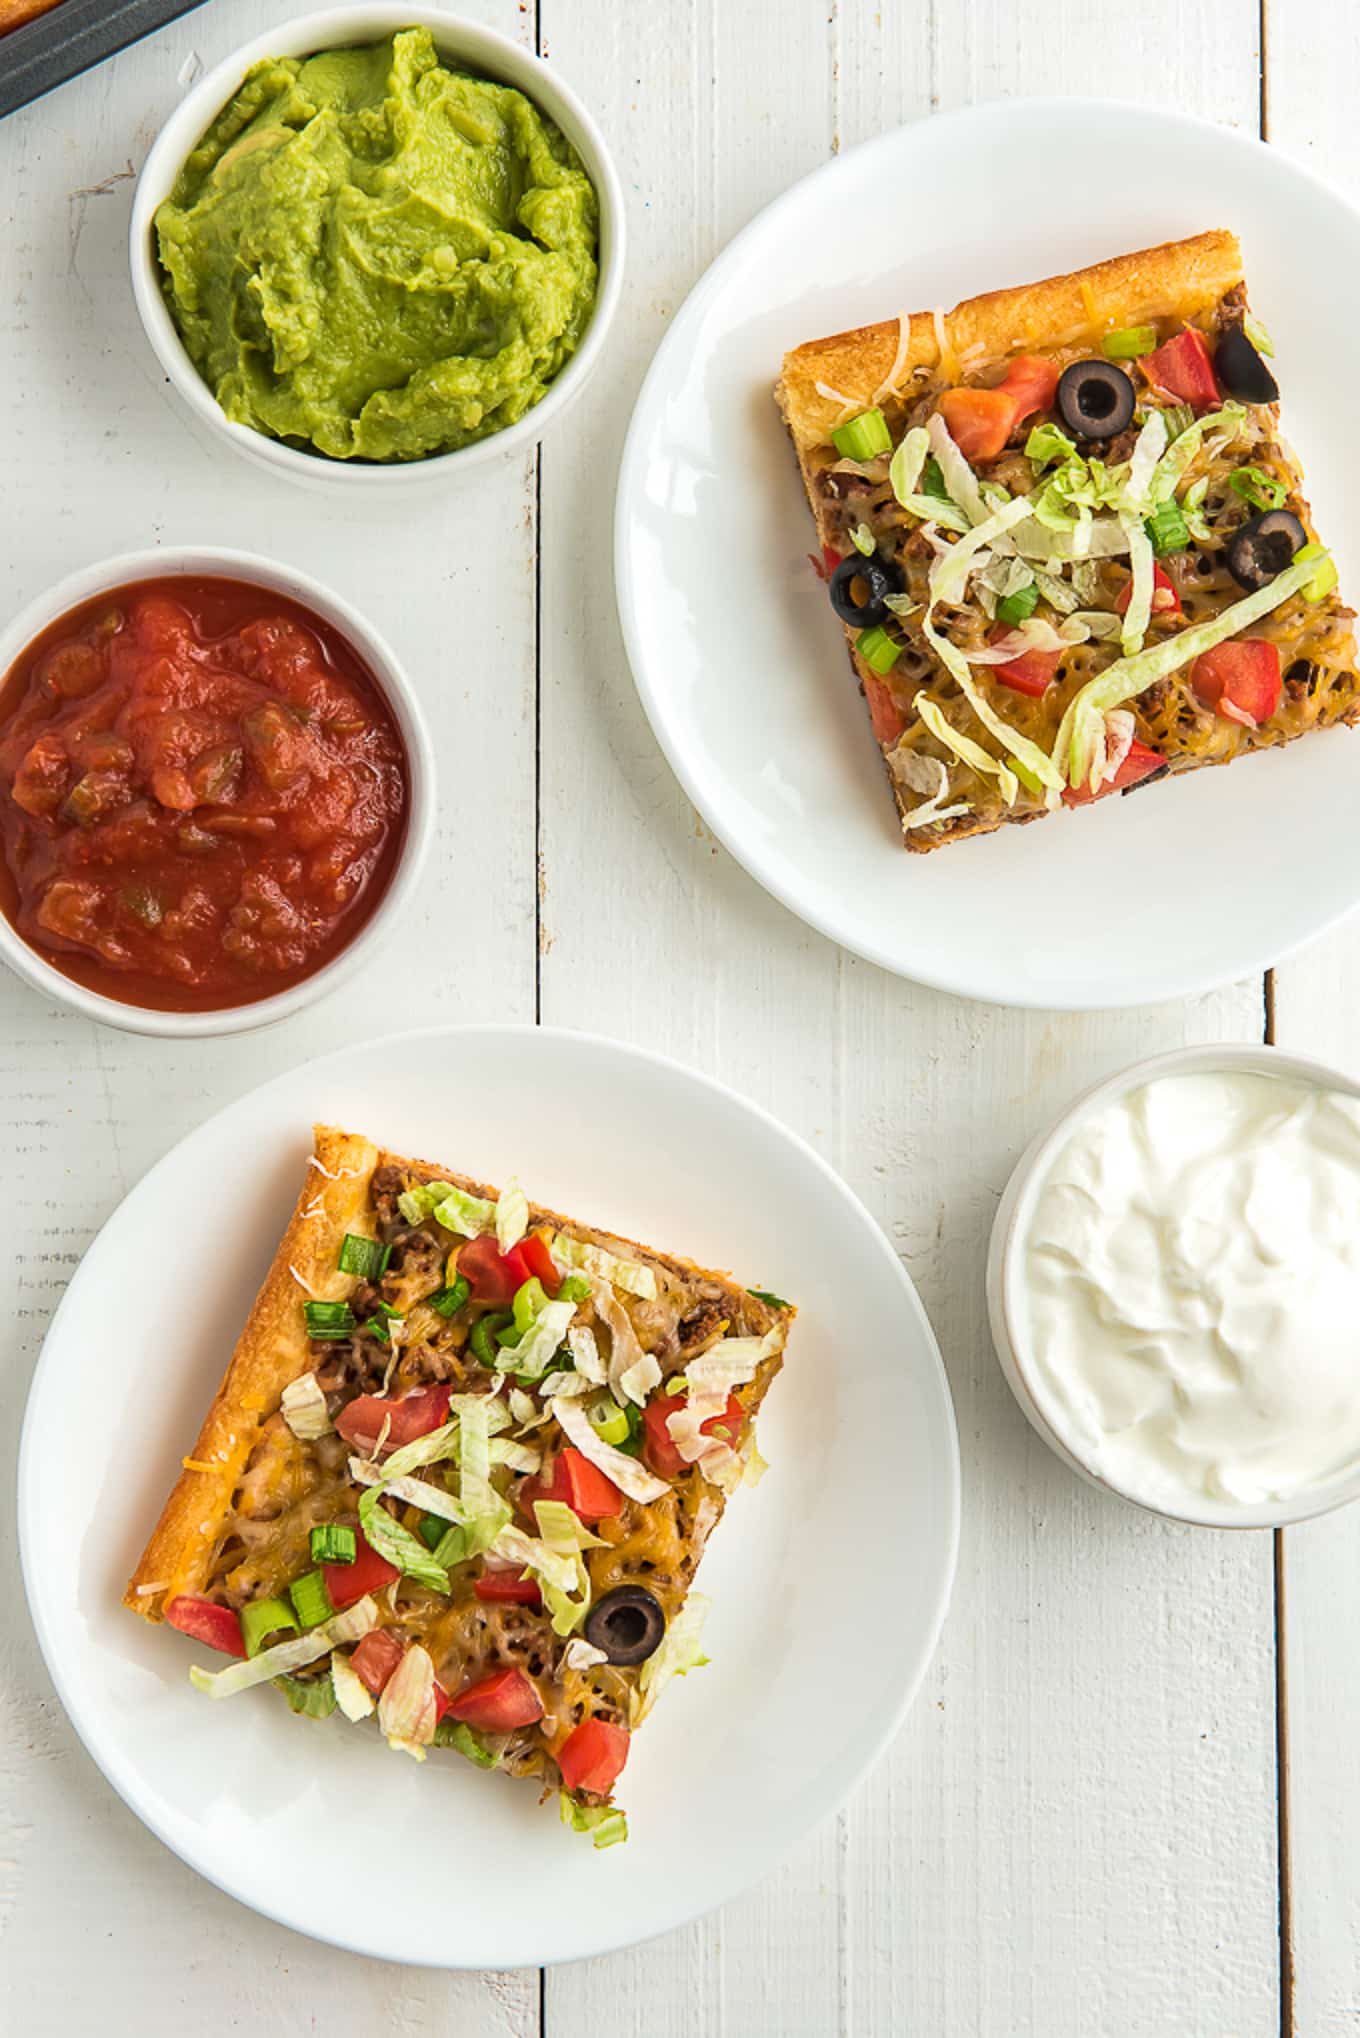 two slices of taco pizza on a plate with salsa, guacamole on the side. /